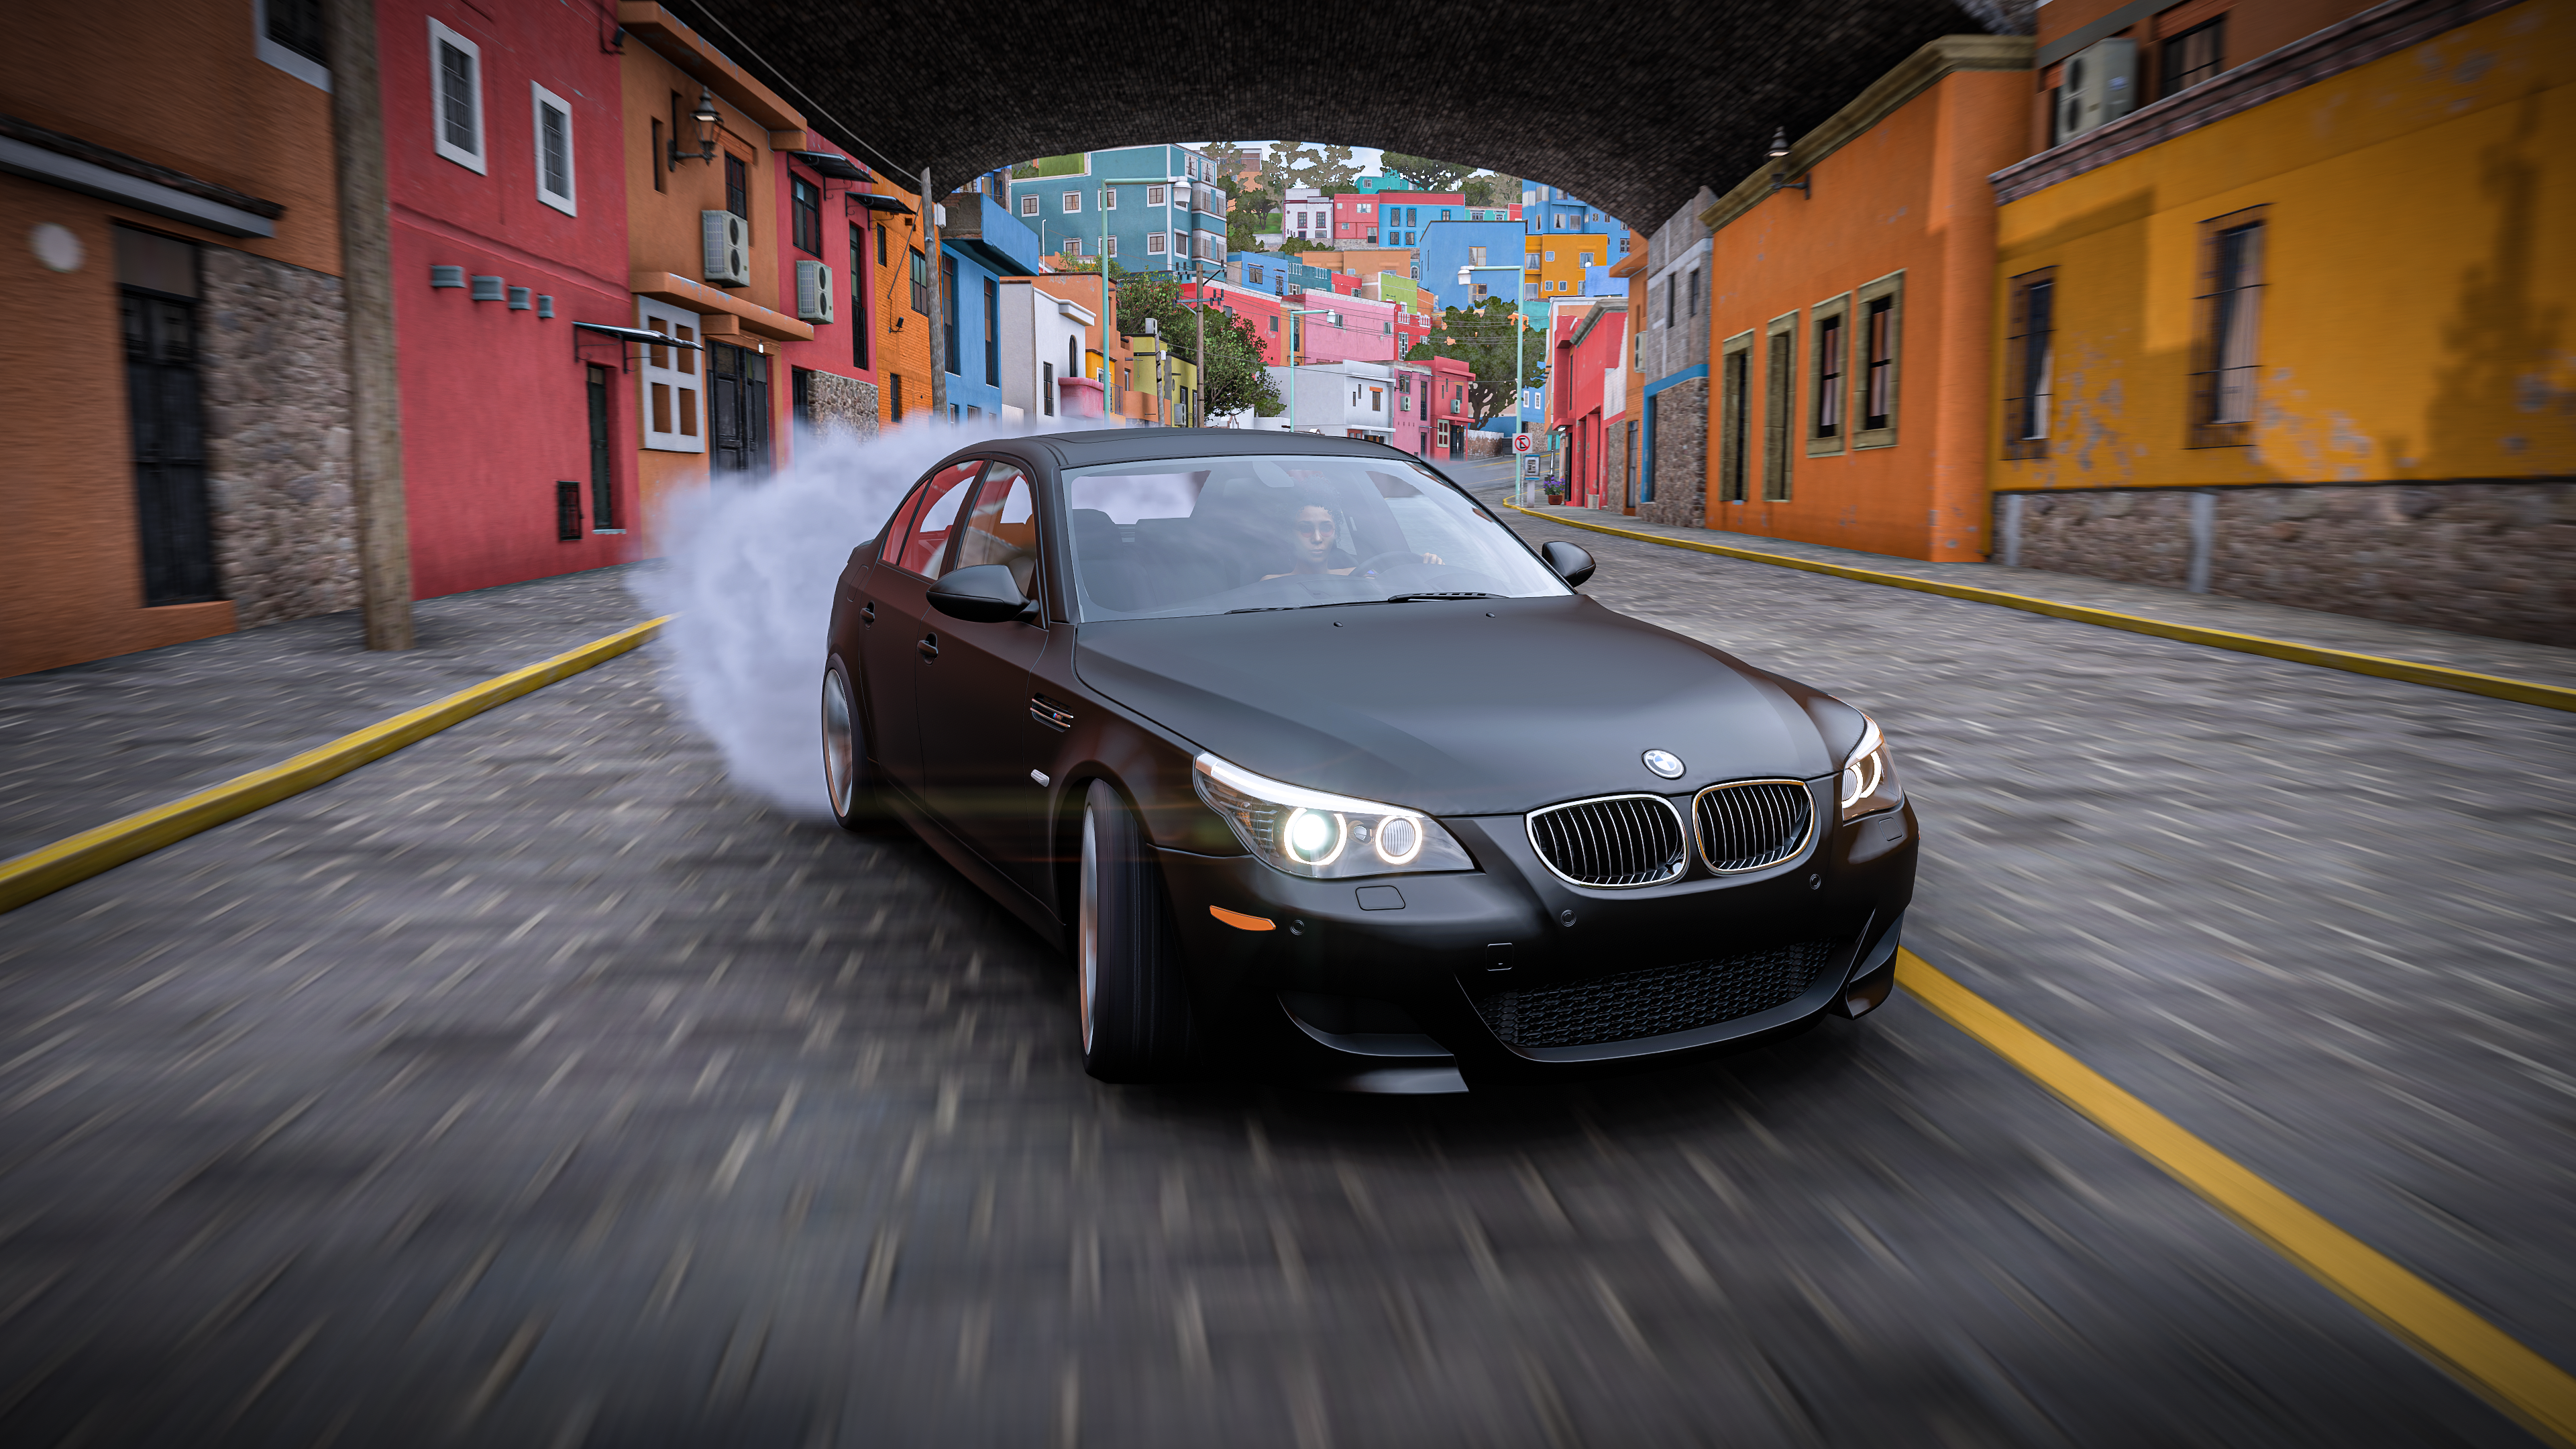 Forza Forza Horizon Forza Horizon 5 BMW BMW E60 BMW M5 Video Games Car Vehicle Reflection Mexican Dr 3840x2160